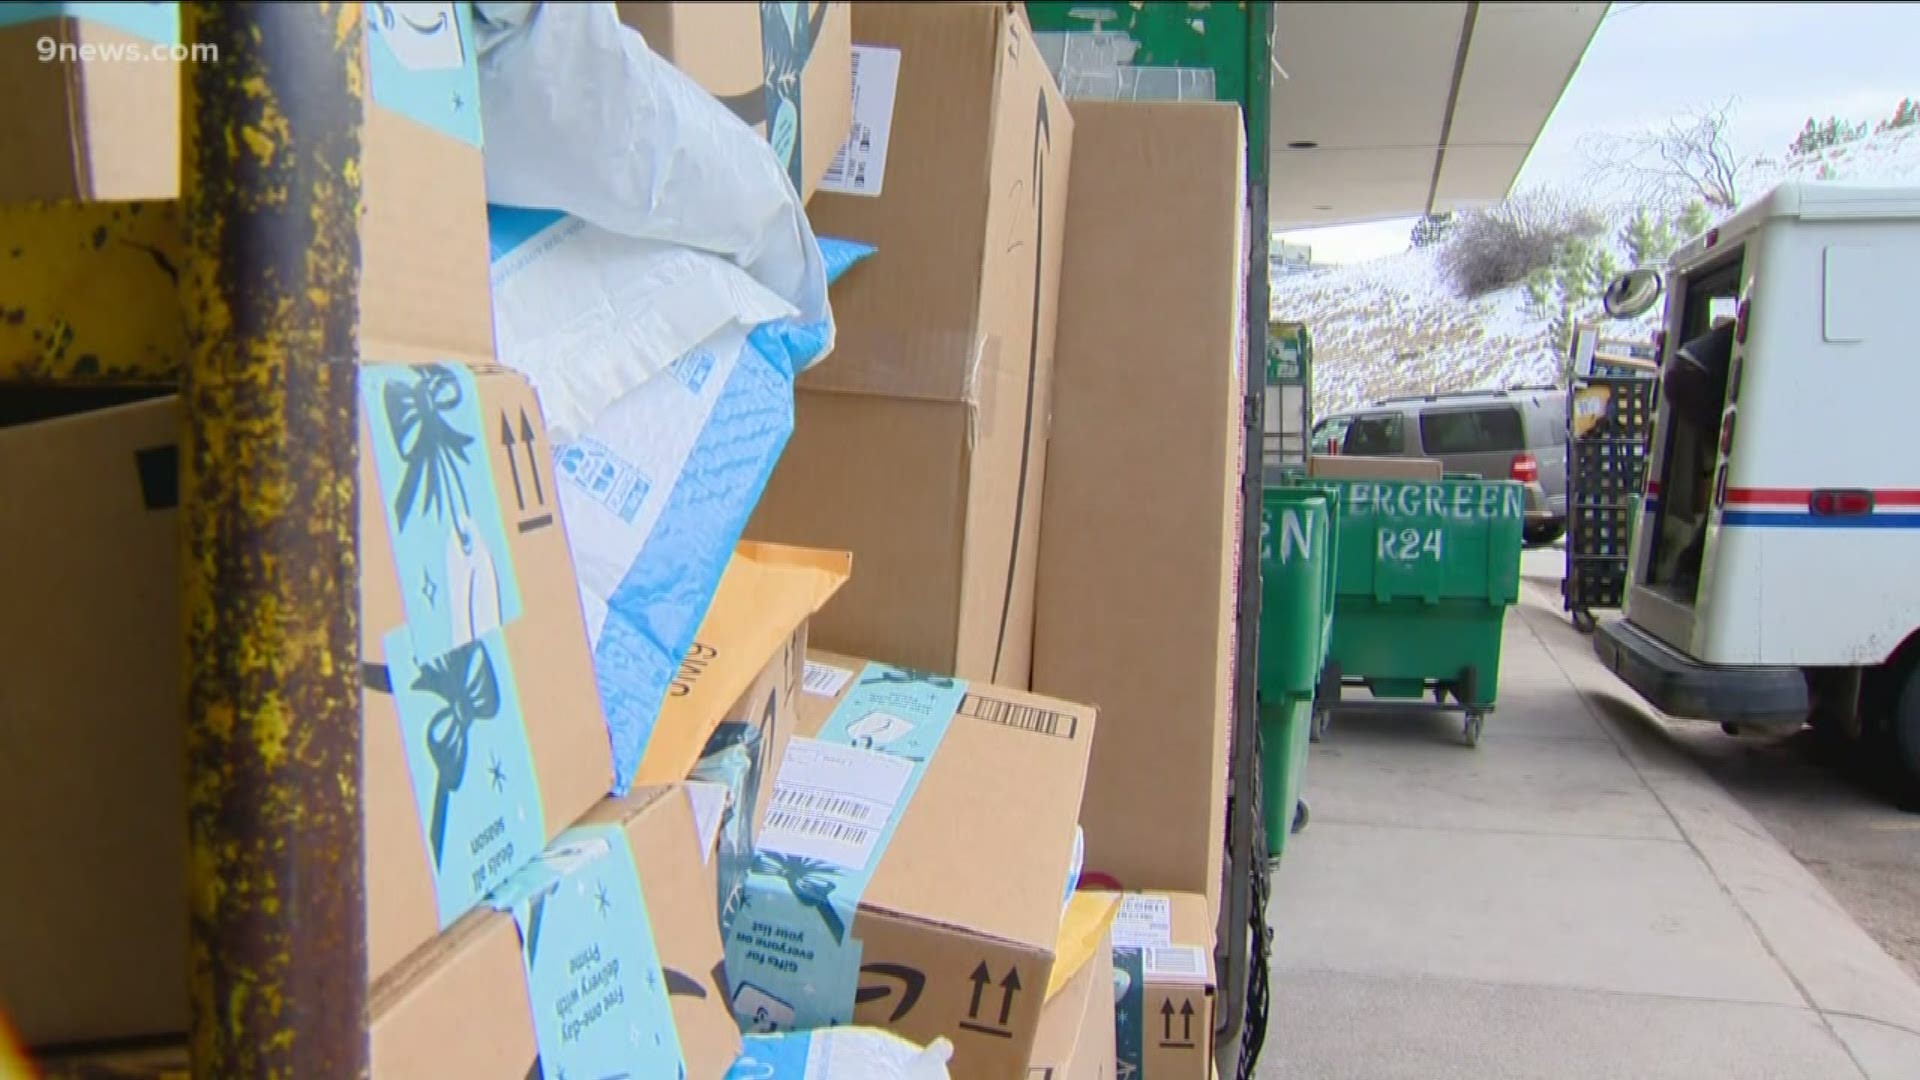 The U.S. Postal Service explained what they're doing about it and how residents can help.